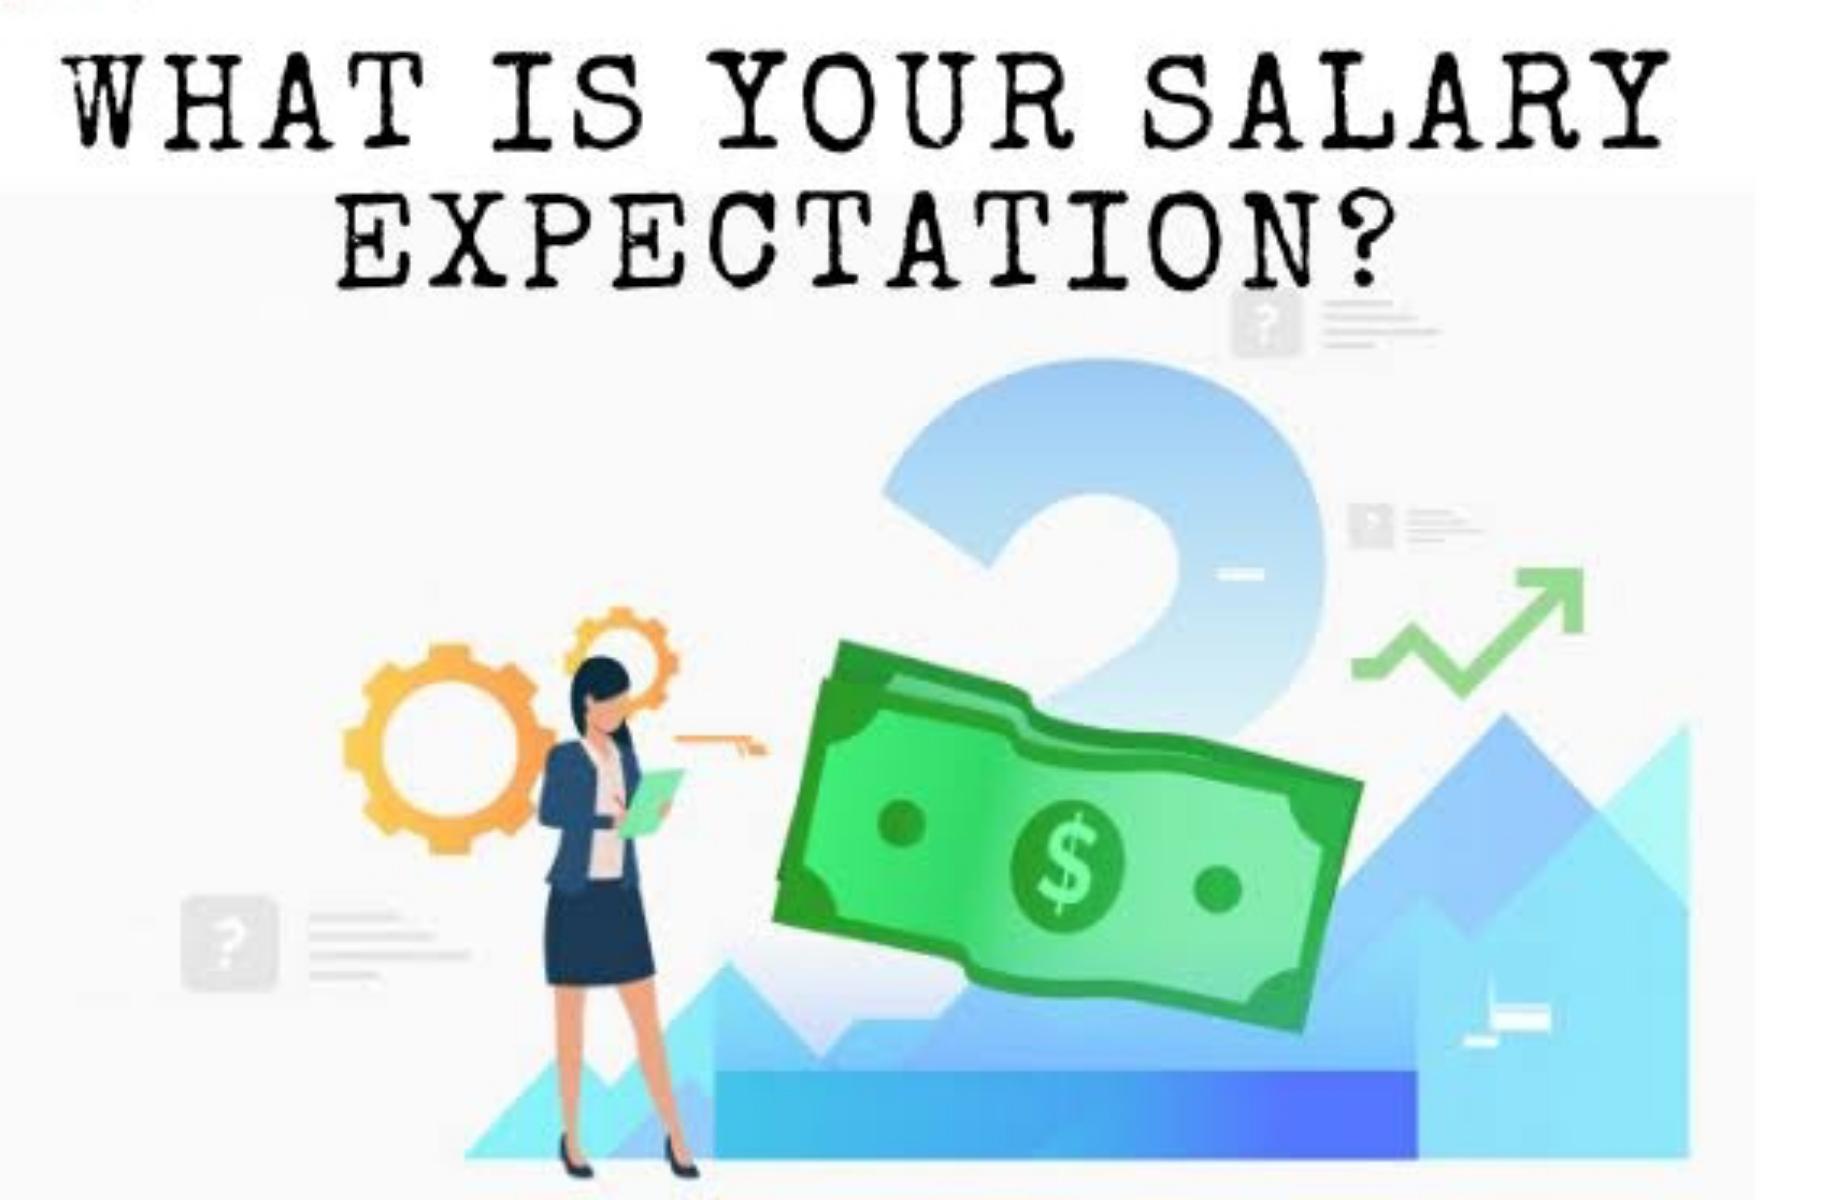 2) What are your salary expectations? 